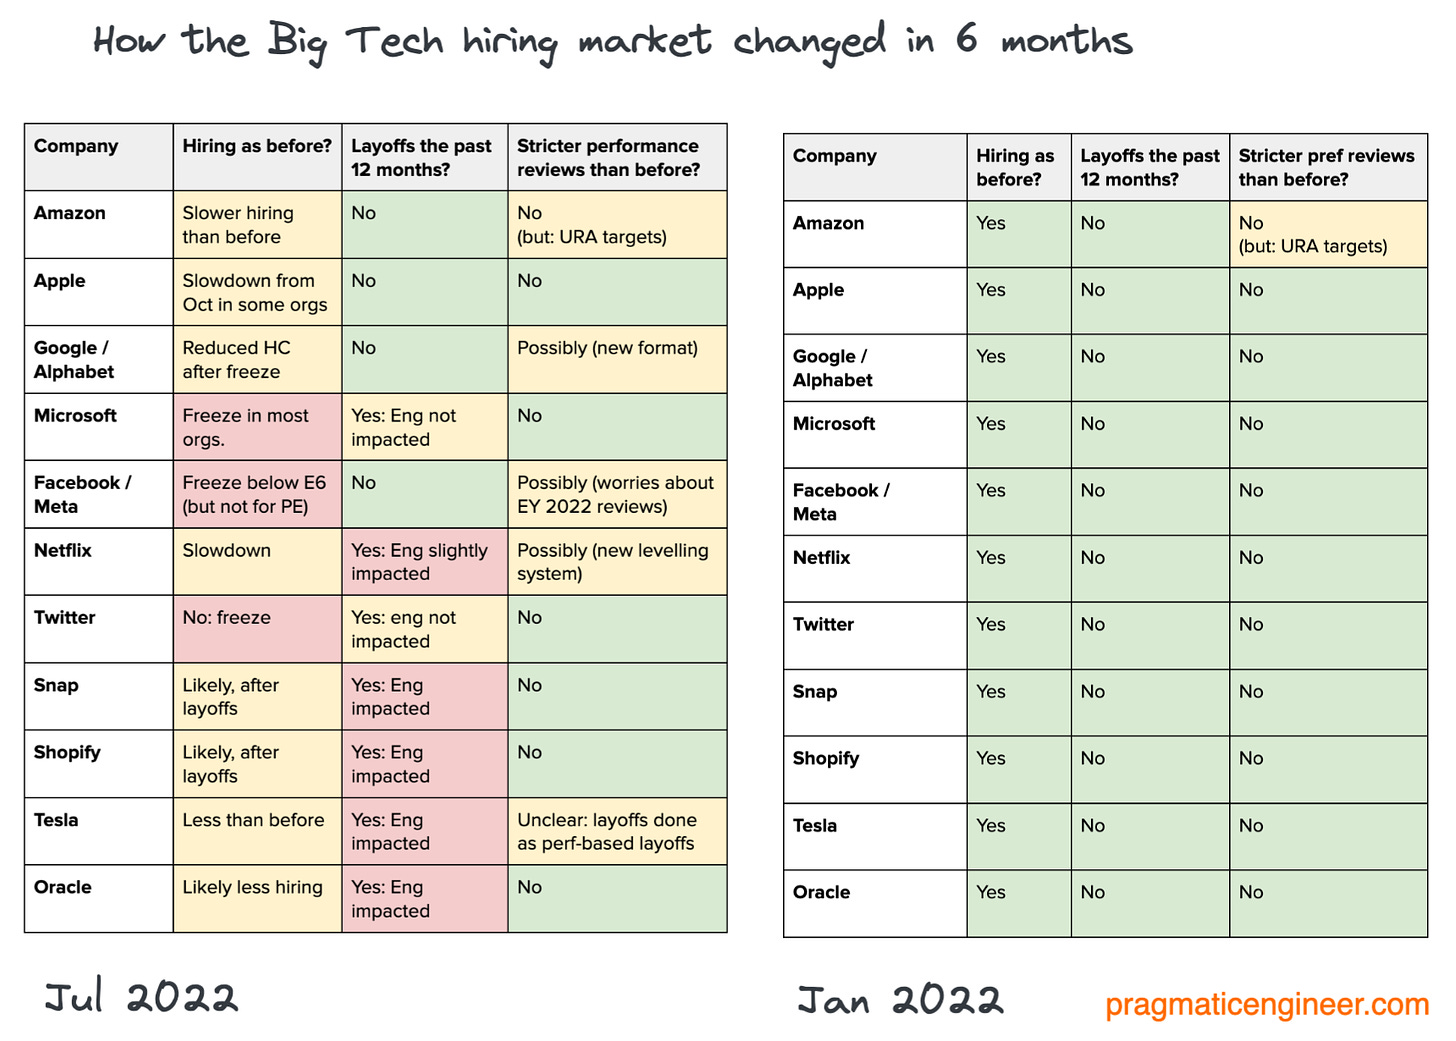 How the Big Tech hiring market changed between Jan-Jul 2022. Modified image from the one published in The Scoop #19.